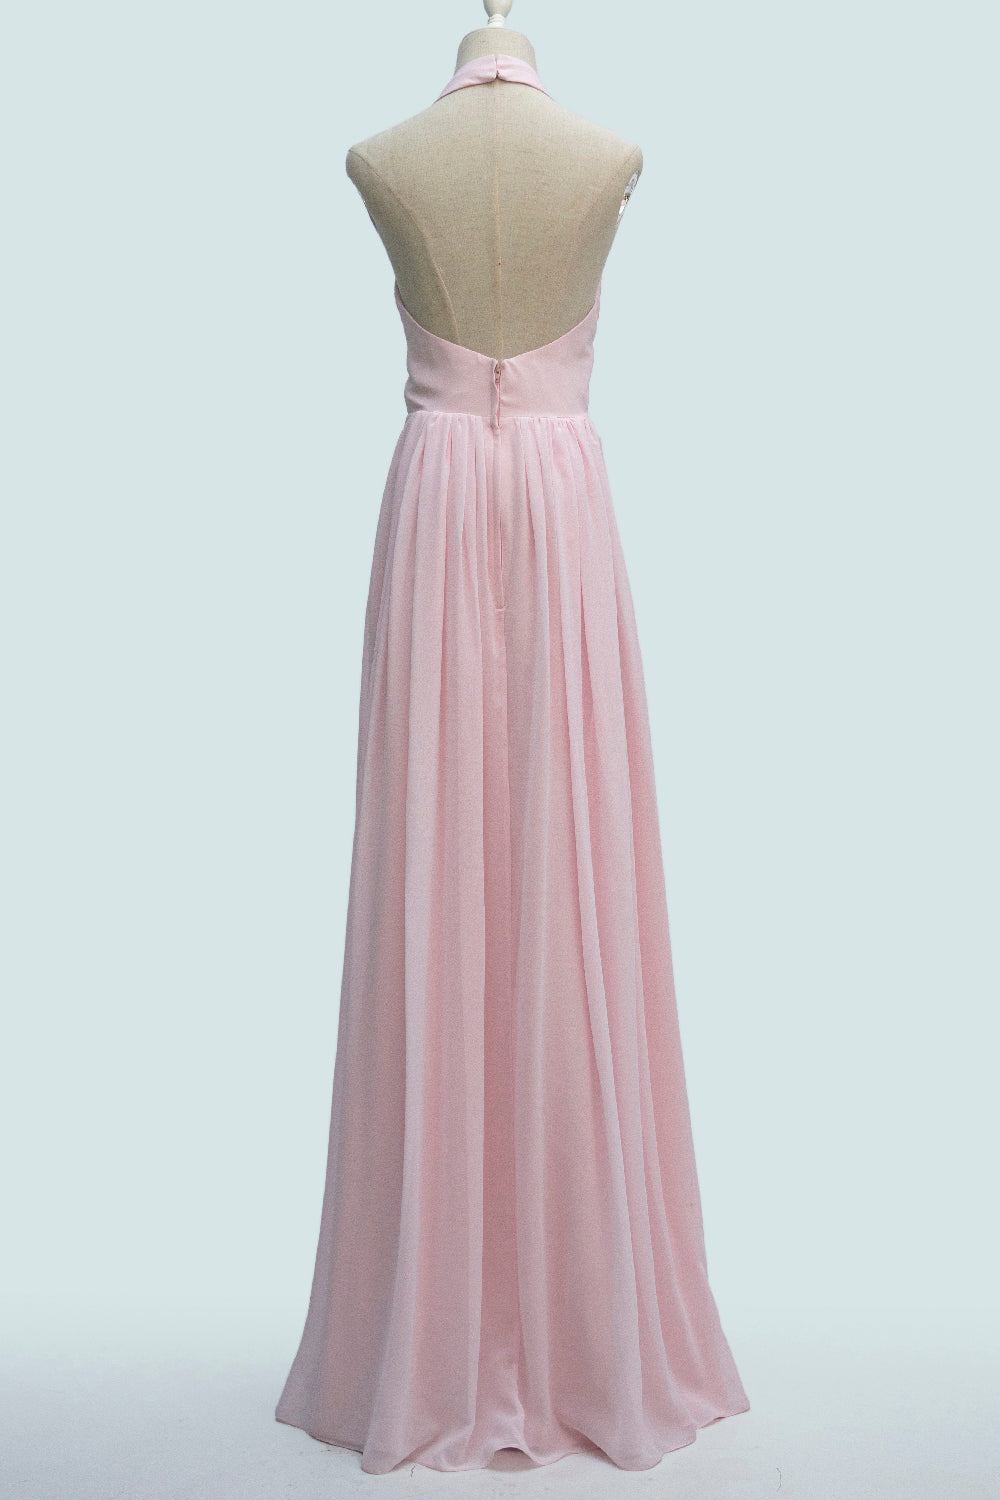 Candy Pink A-line Halter Neckline Pleated Long Bridesmaid Dress